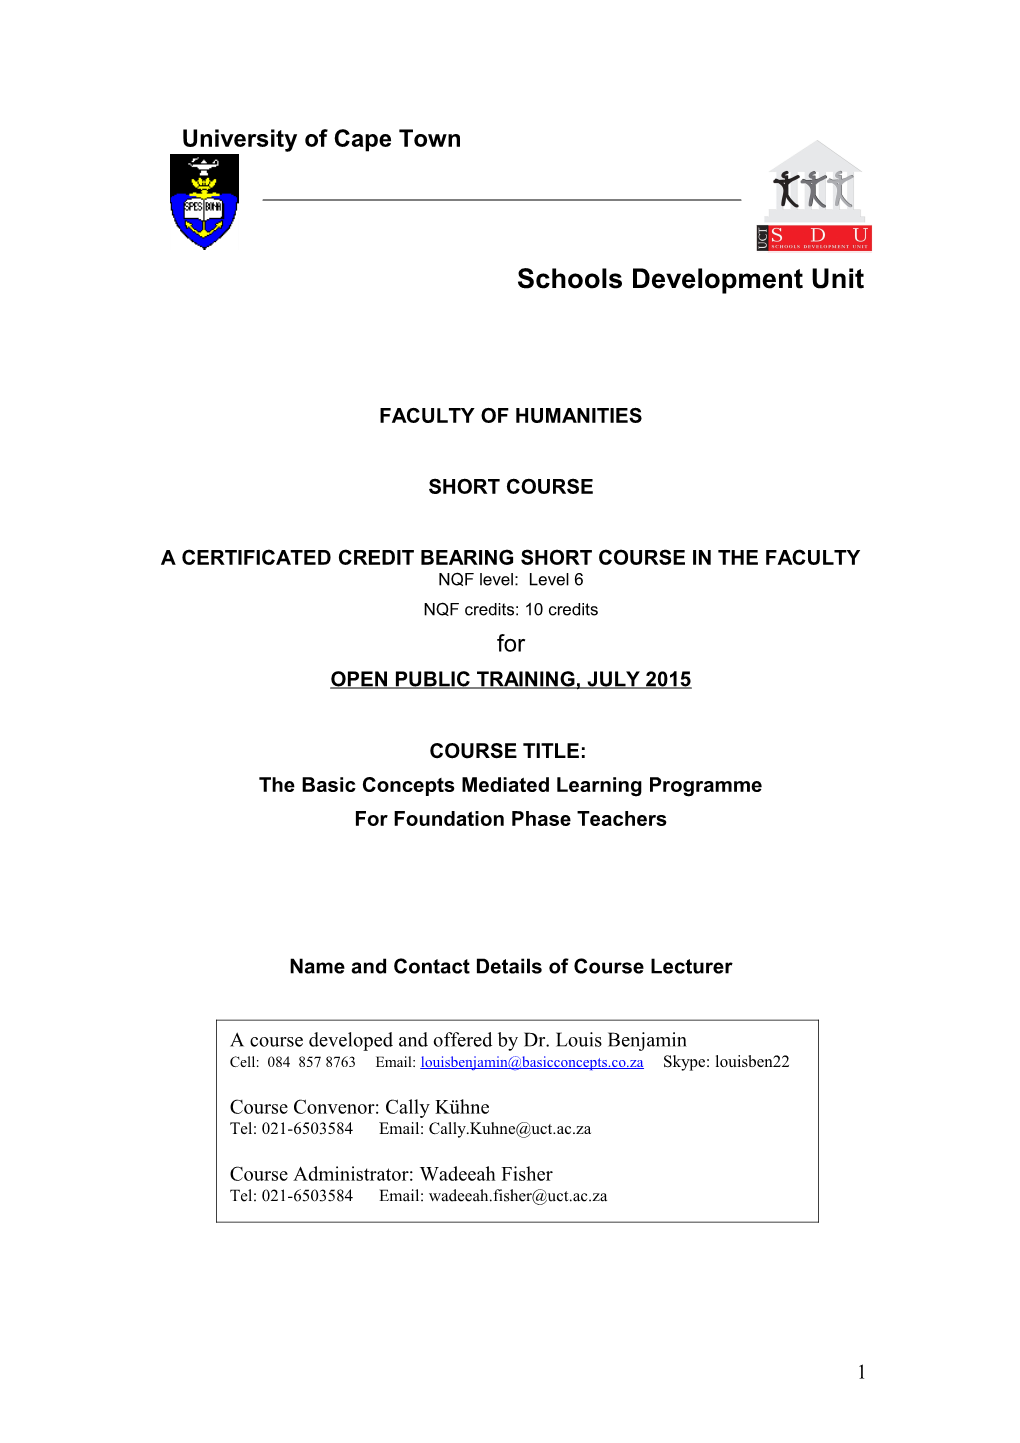 UCT Short Course